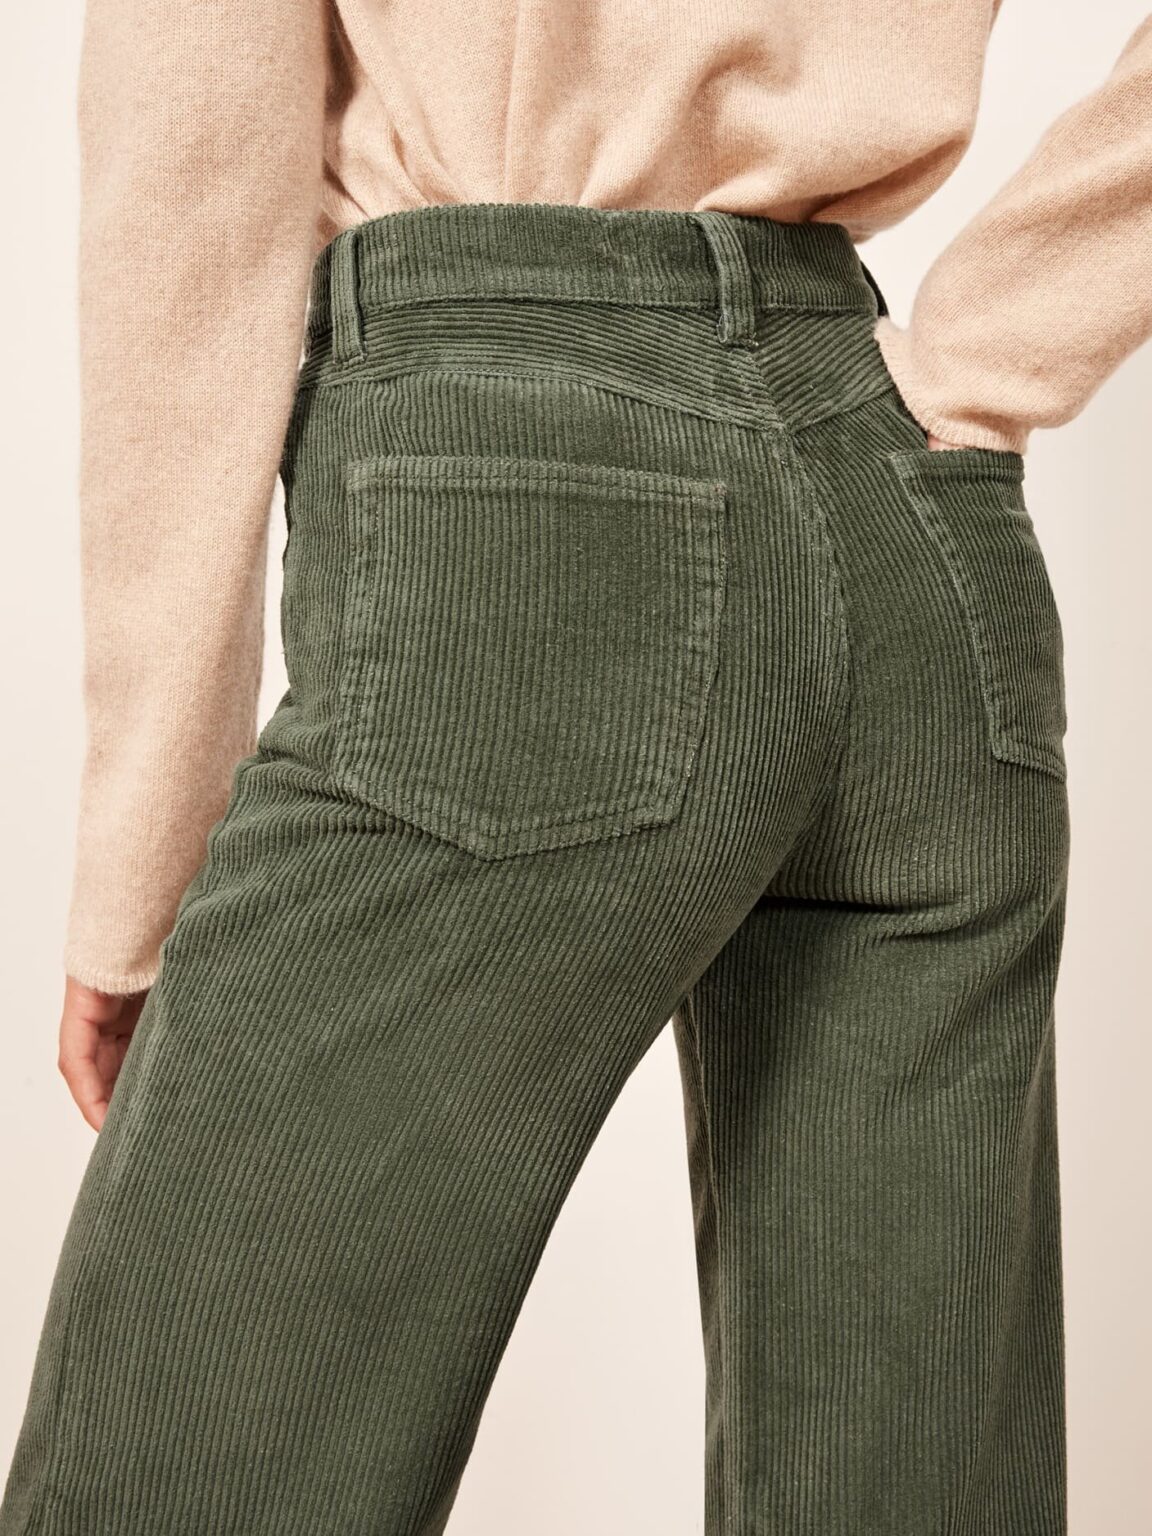 4 Corduroy Pants From Sustainable Brands - The Good Trade